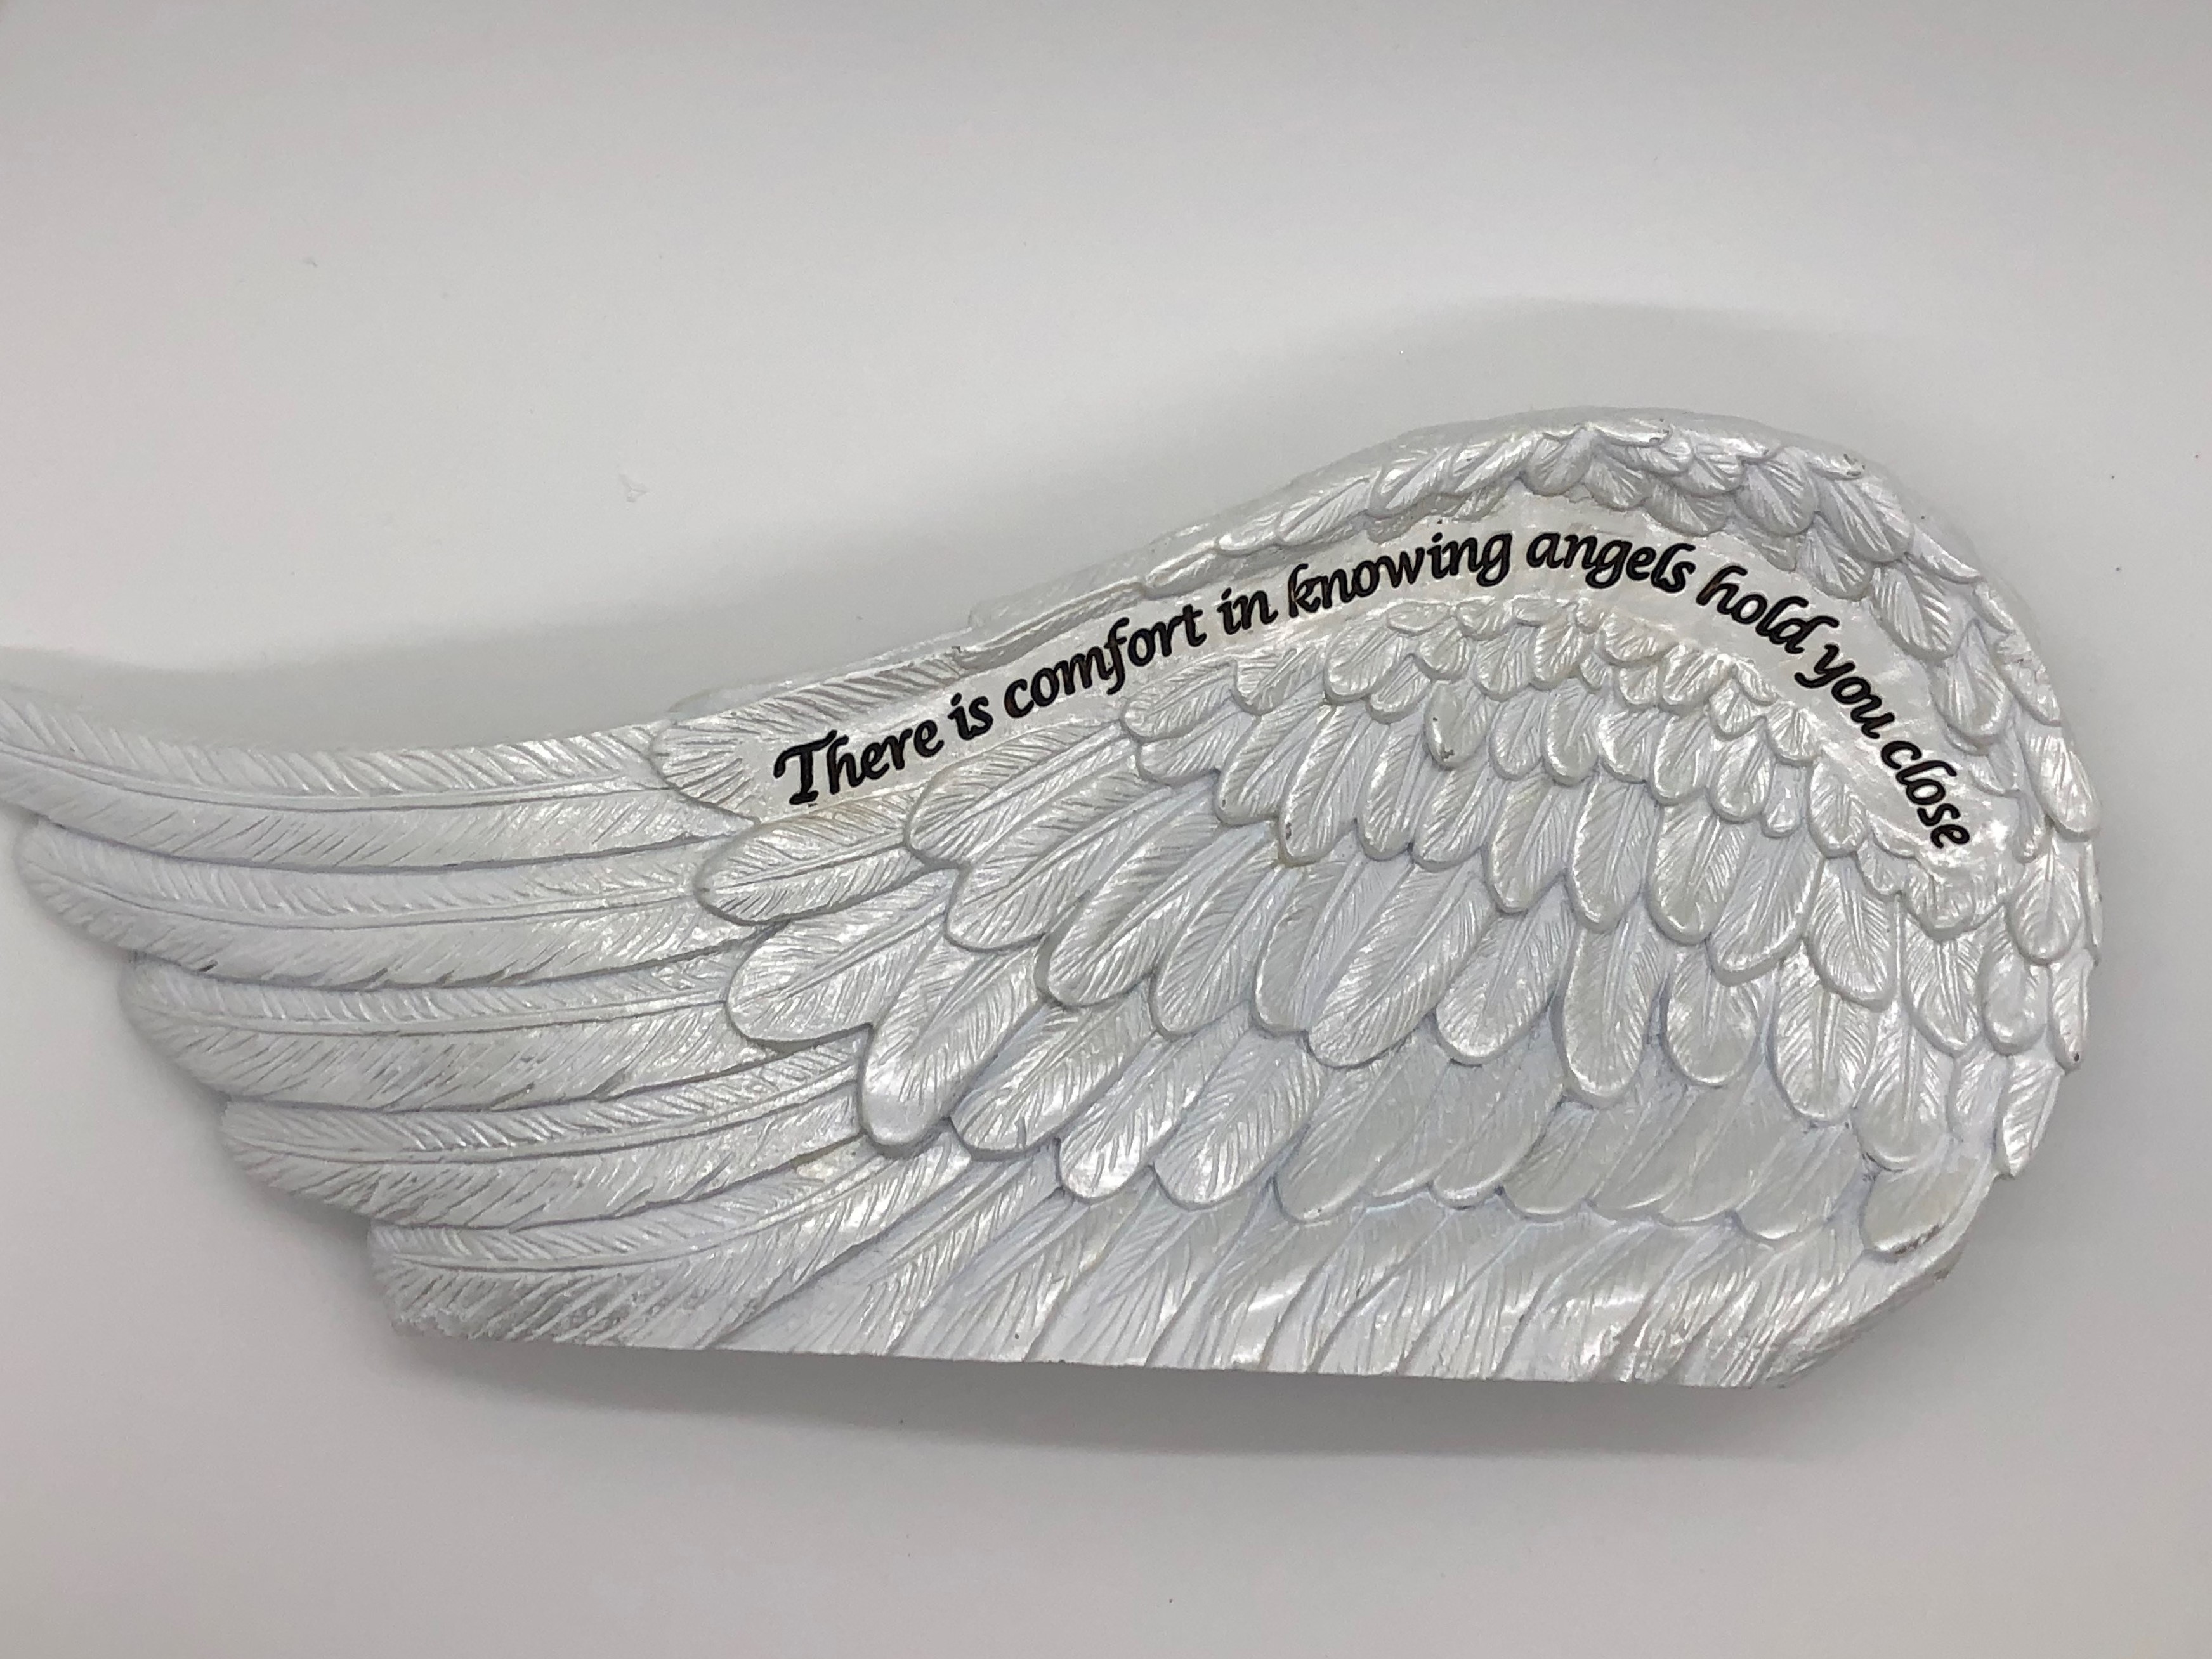 Pearl Finished Angel Wing ~ There is comfort knowing angels hold you close